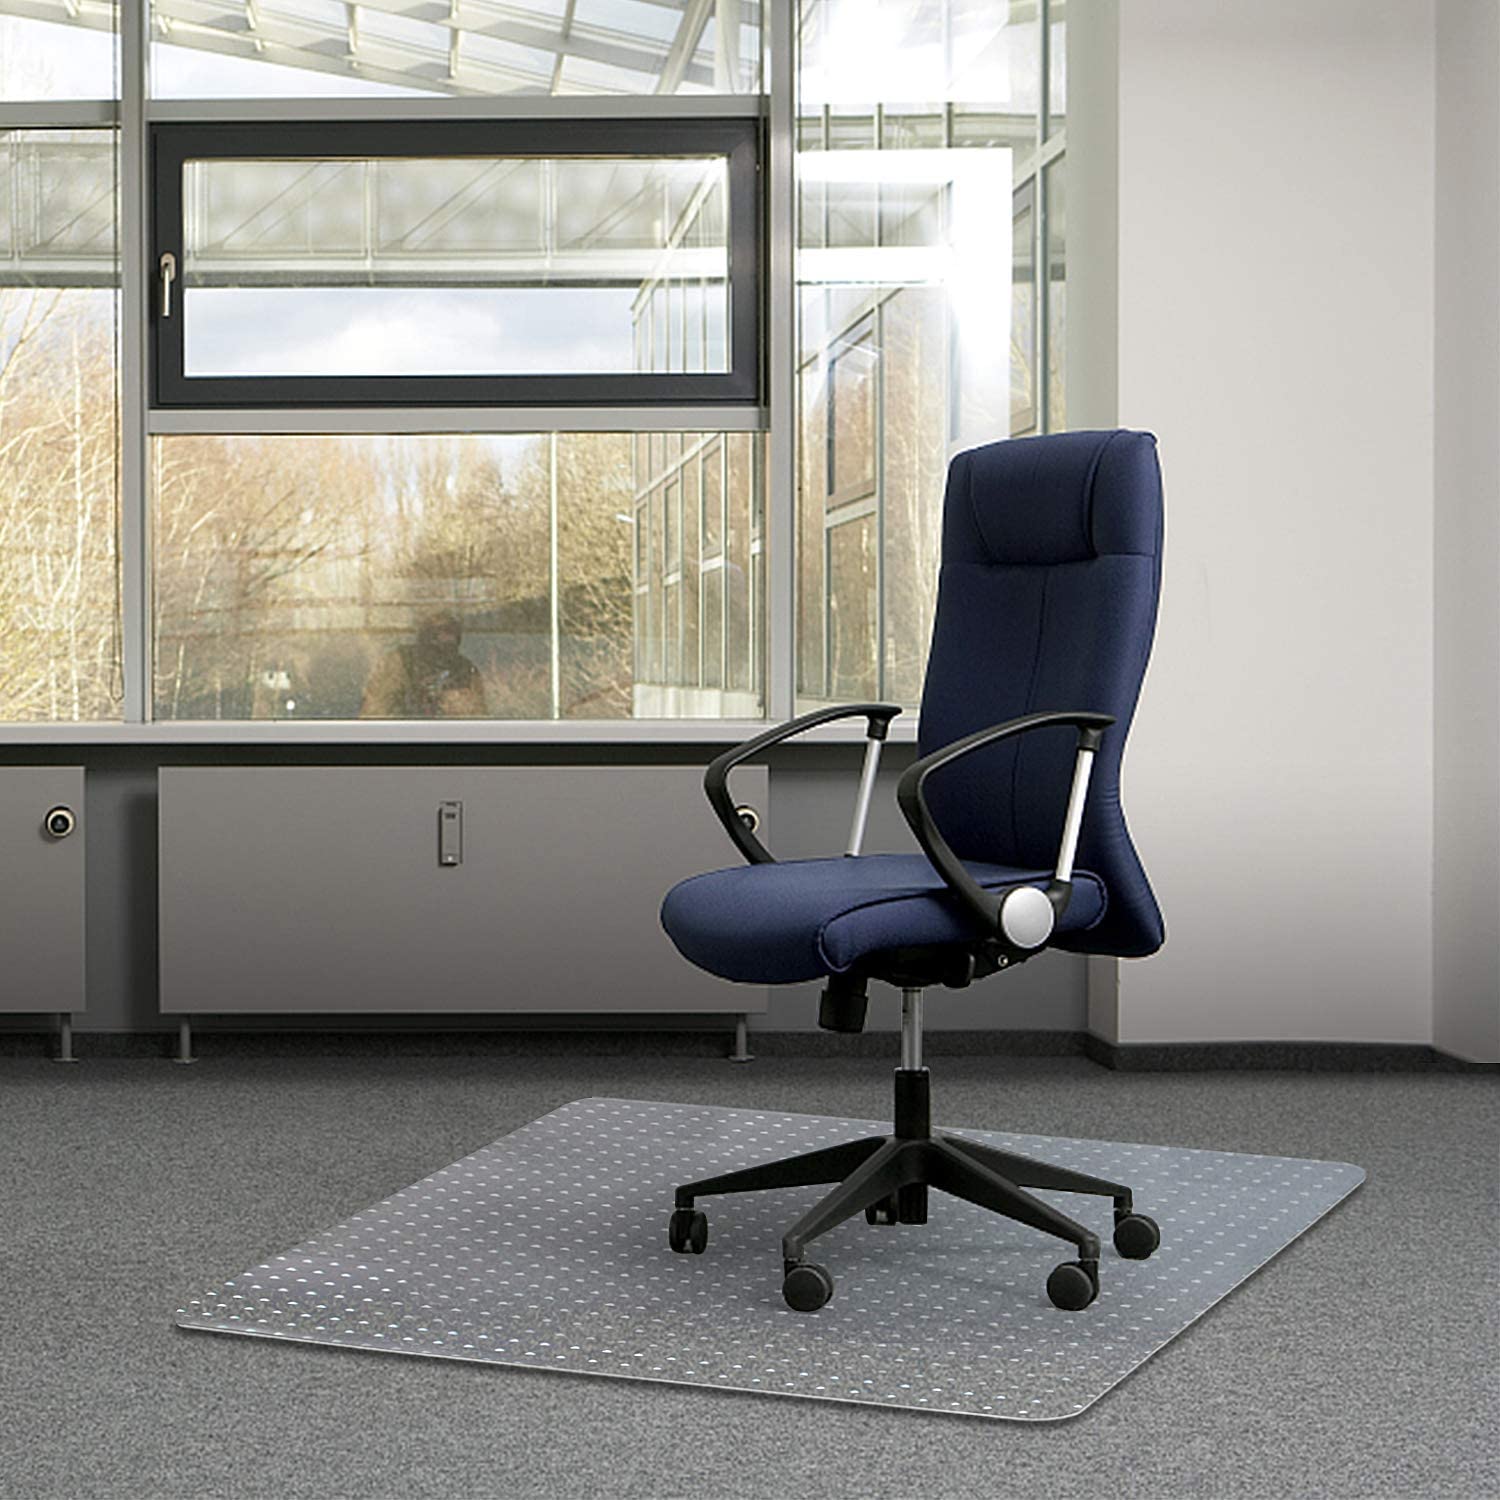 Kuyal Clear Odorless Chair Mat For Carpeted Floors